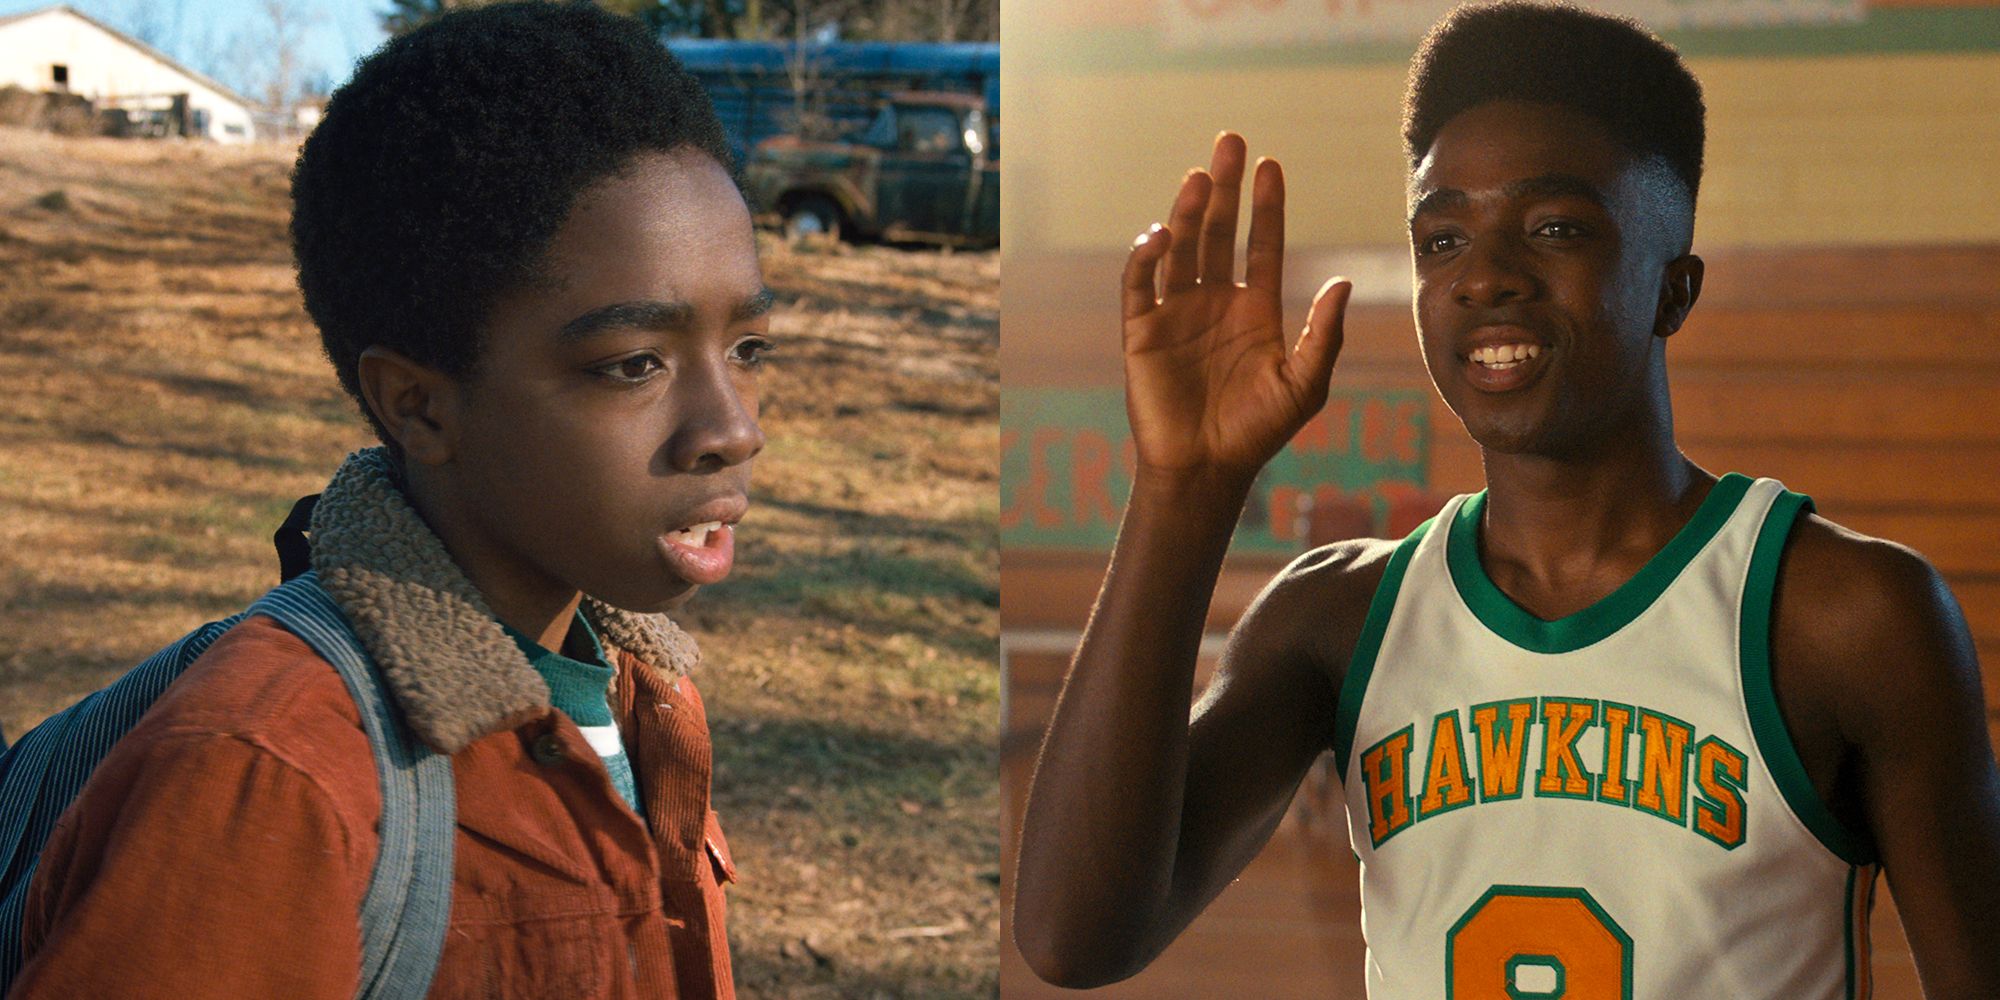 Stranger Things season 4 then vs now: See how the cast has grown up